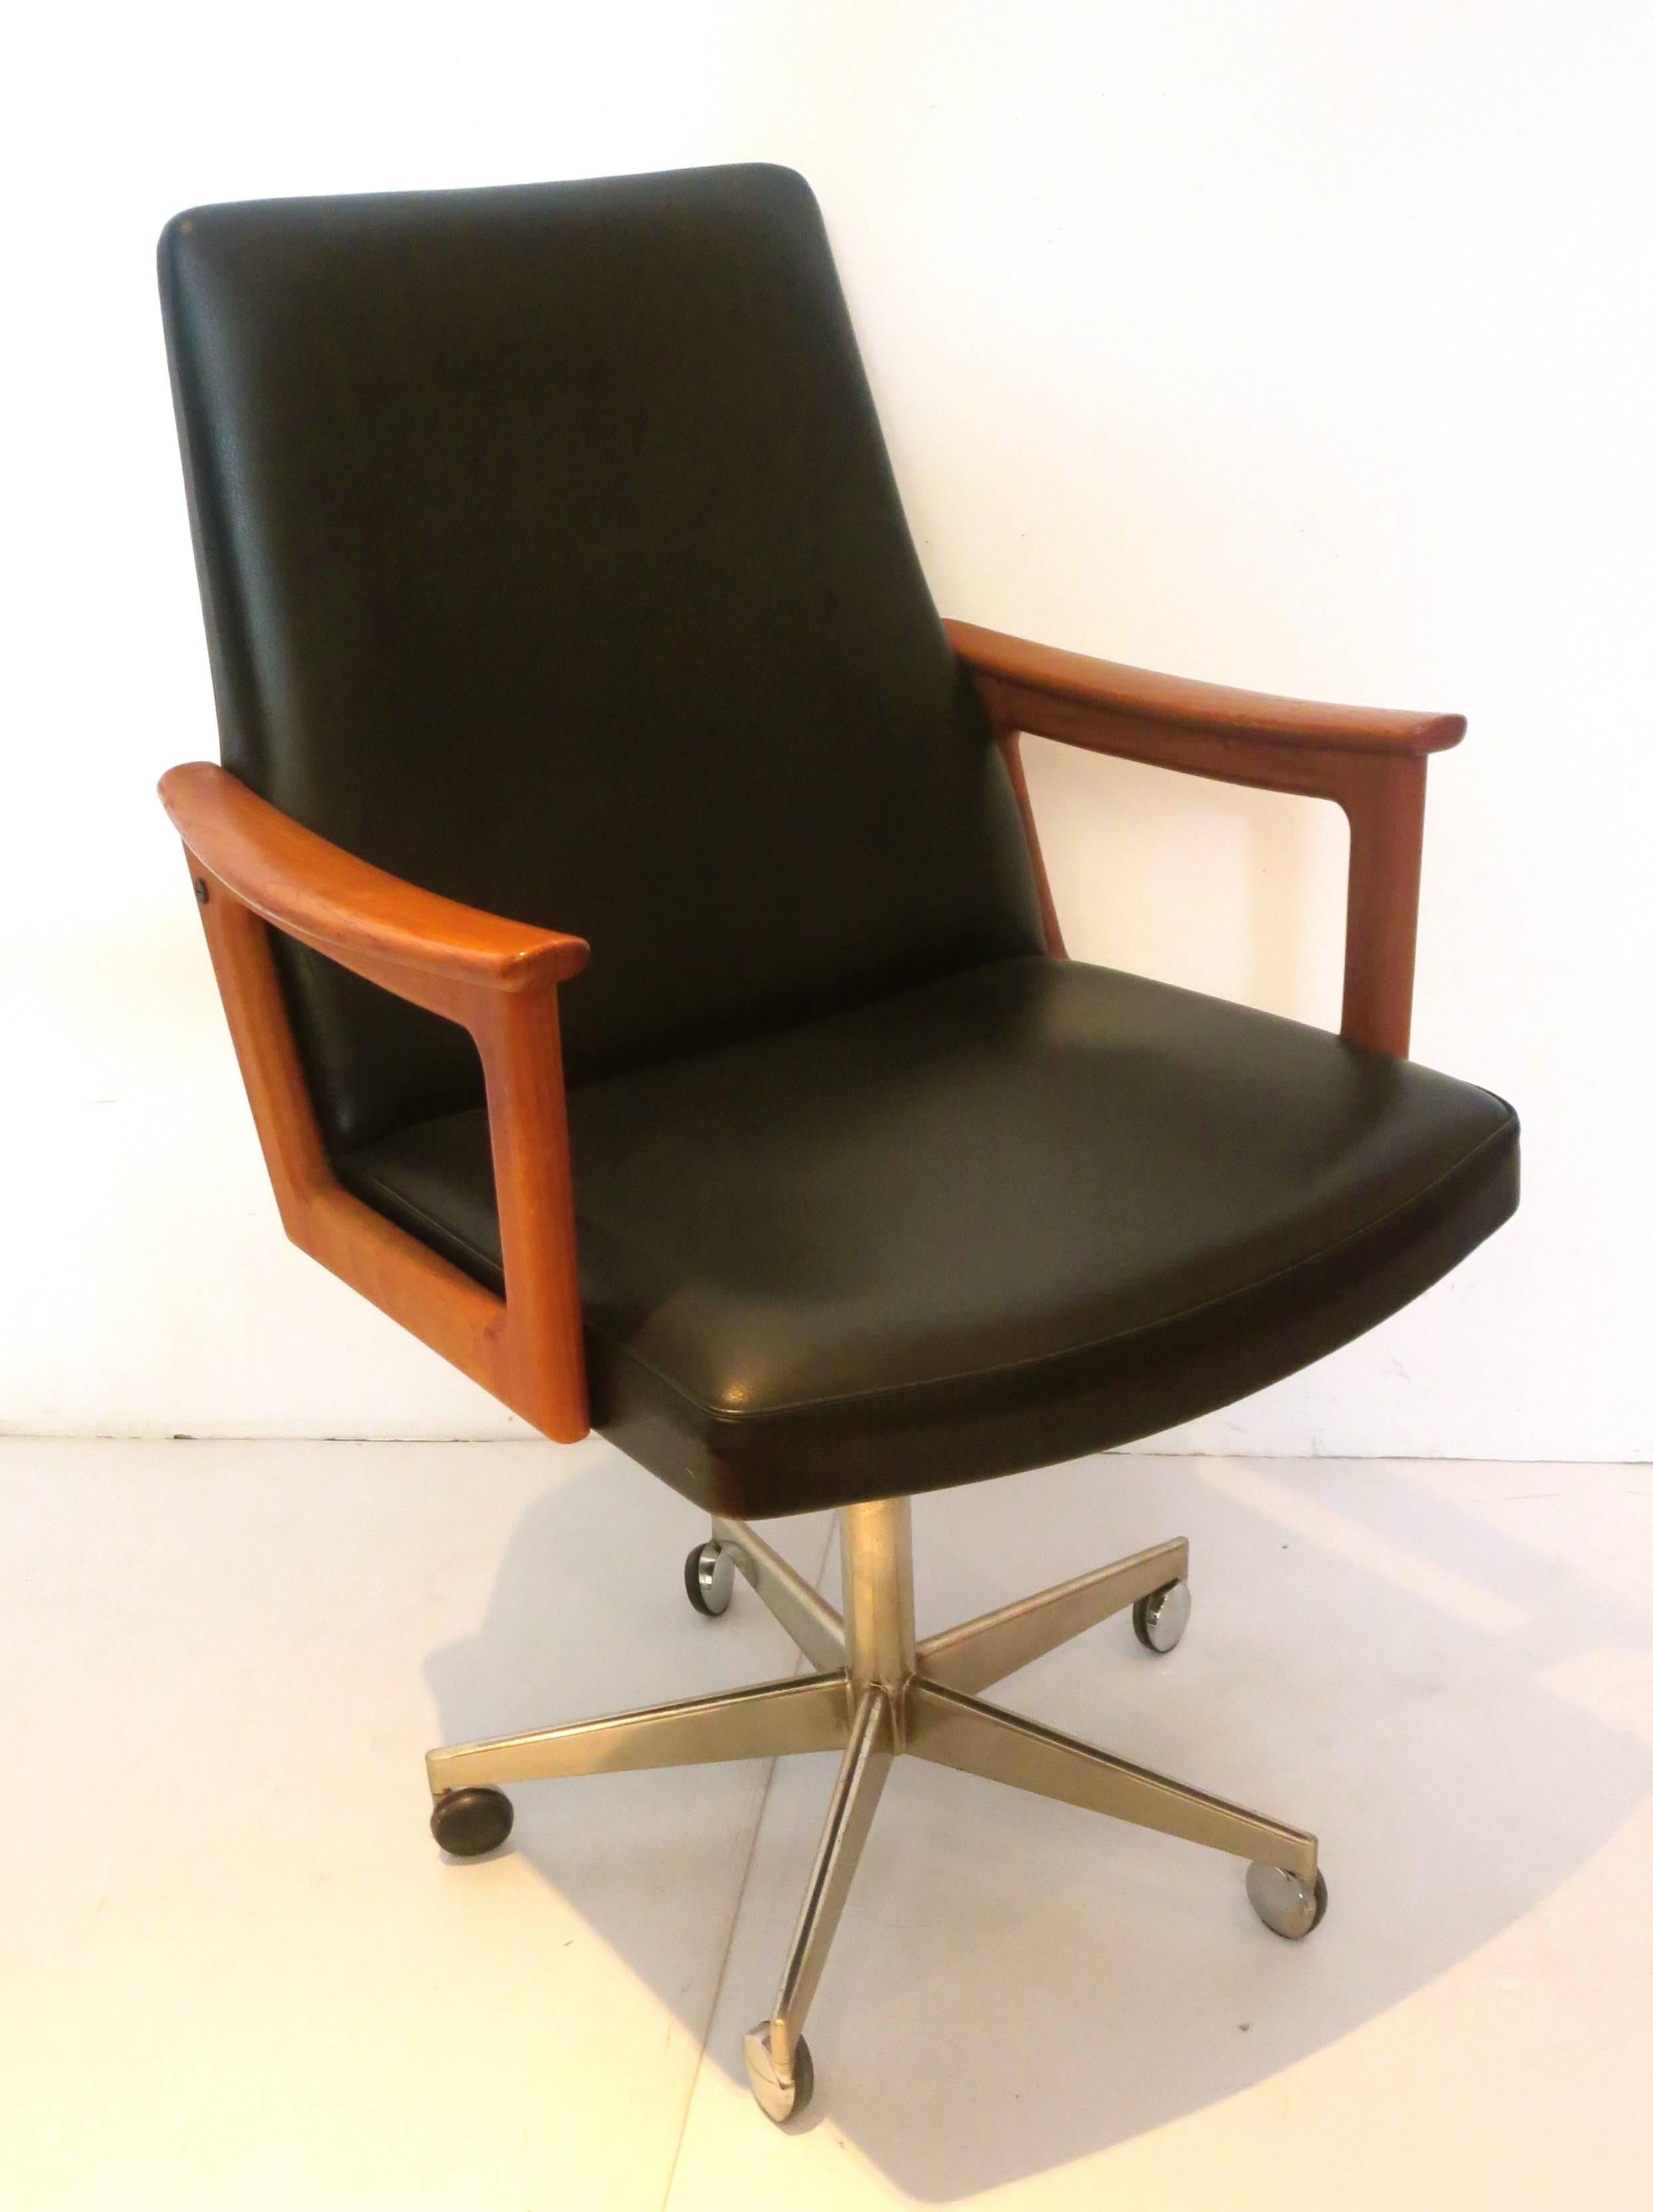 Beautiful single executive arm chair designed by Erik Kirkegaard, circa 1960s solid teak arms, the chair reclines back and forward, also goes up and down, black Naugahyde original material in good condition on a chrome base on casters.